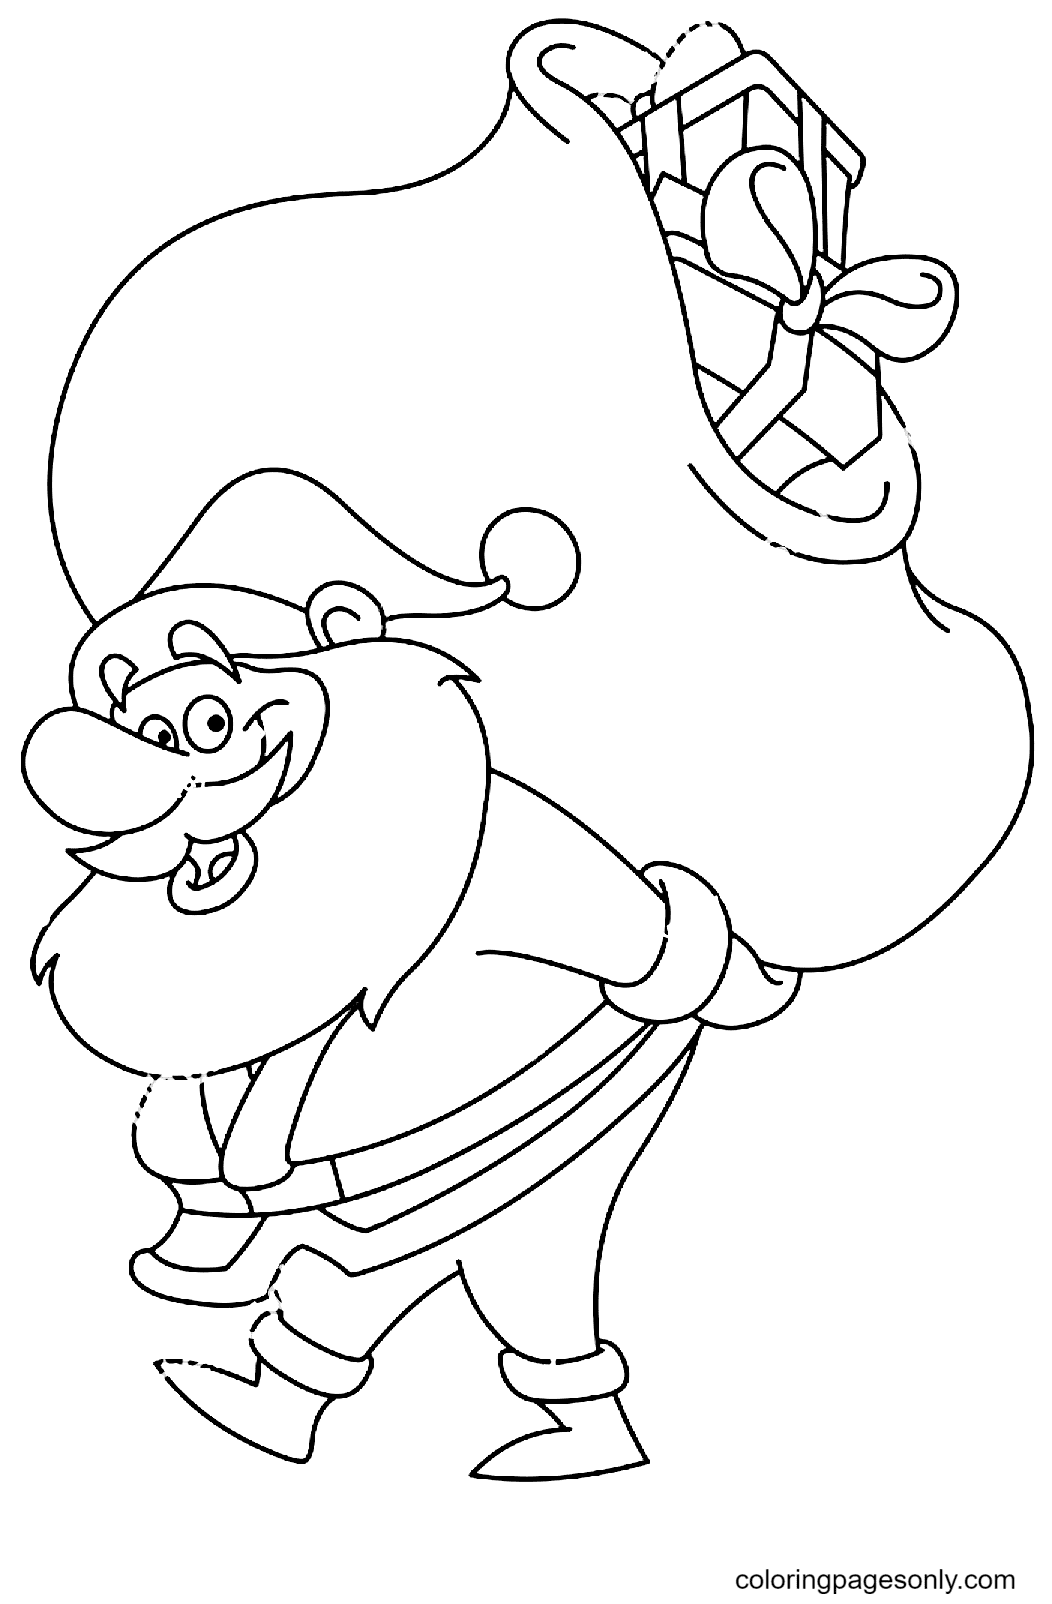 Santa Claus Carries a Large Gift Bag on His Back Coloring Page